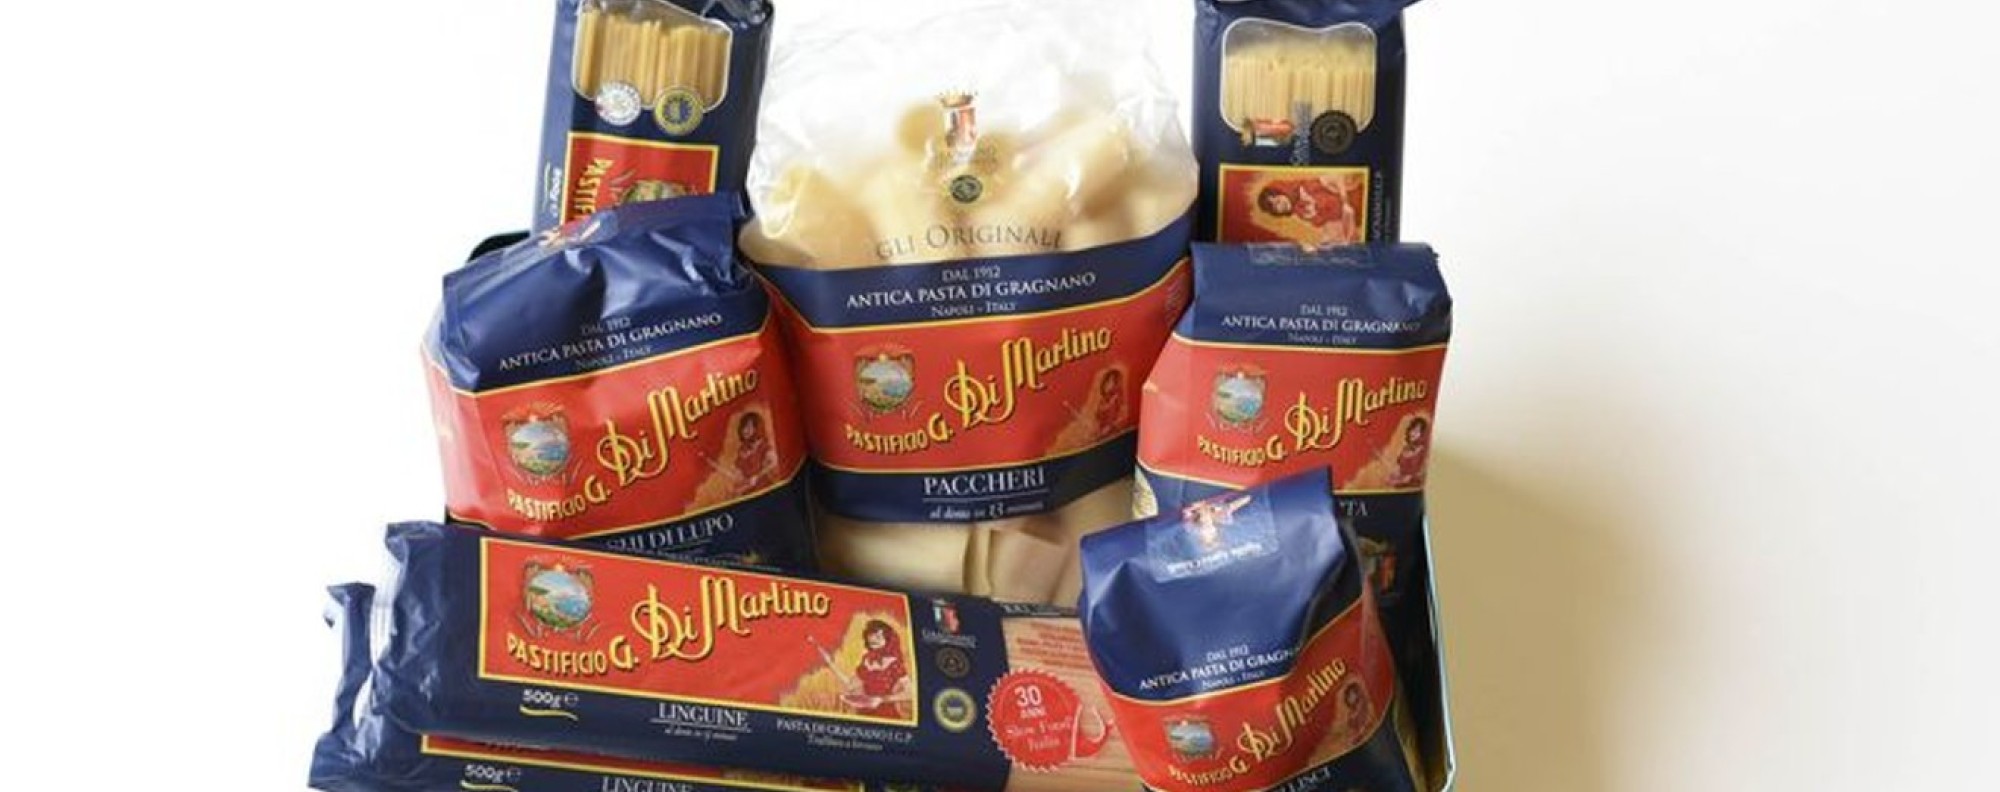 Dolce & Gabbana are now in the pasta business | South China Morning Post